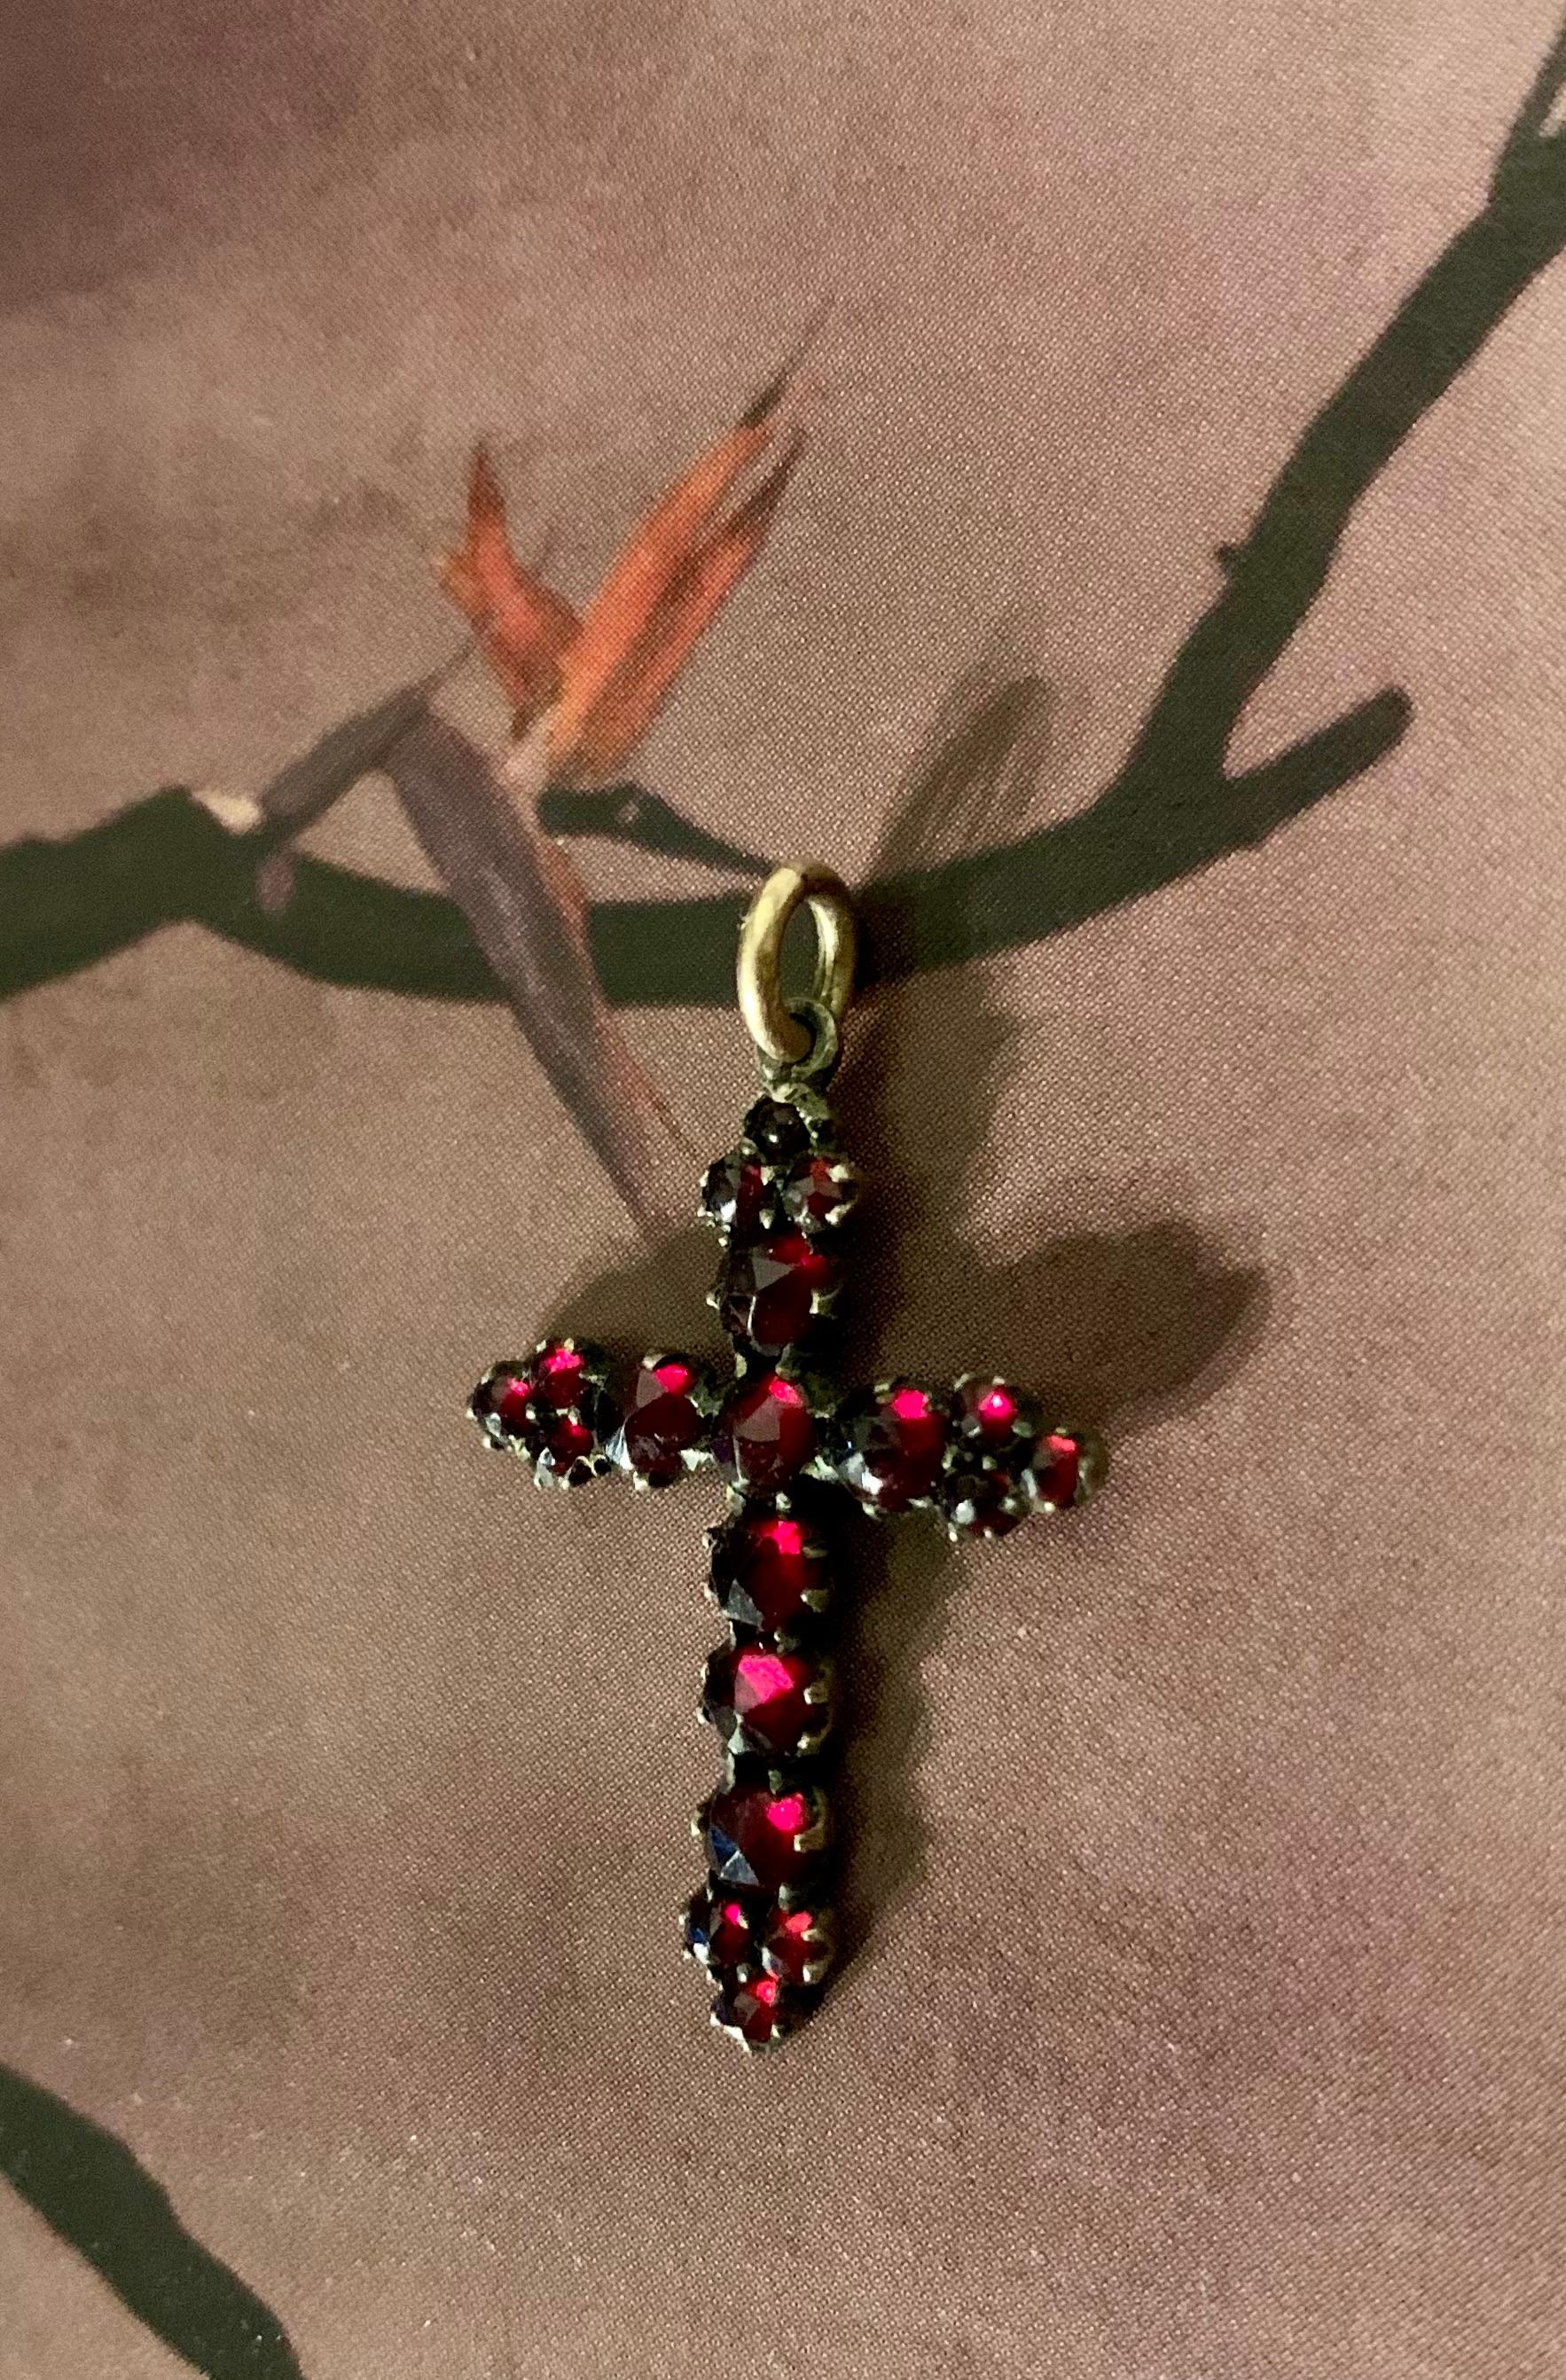 Antique Victorian period garnet, 14K Rose gold and silver cross pendant
19th Century
Unusual trilobed antique garnet cross composed of seven large garnets and twelve smaller garnets at the terminals. Rich, ruby red color garnets set in silver with a